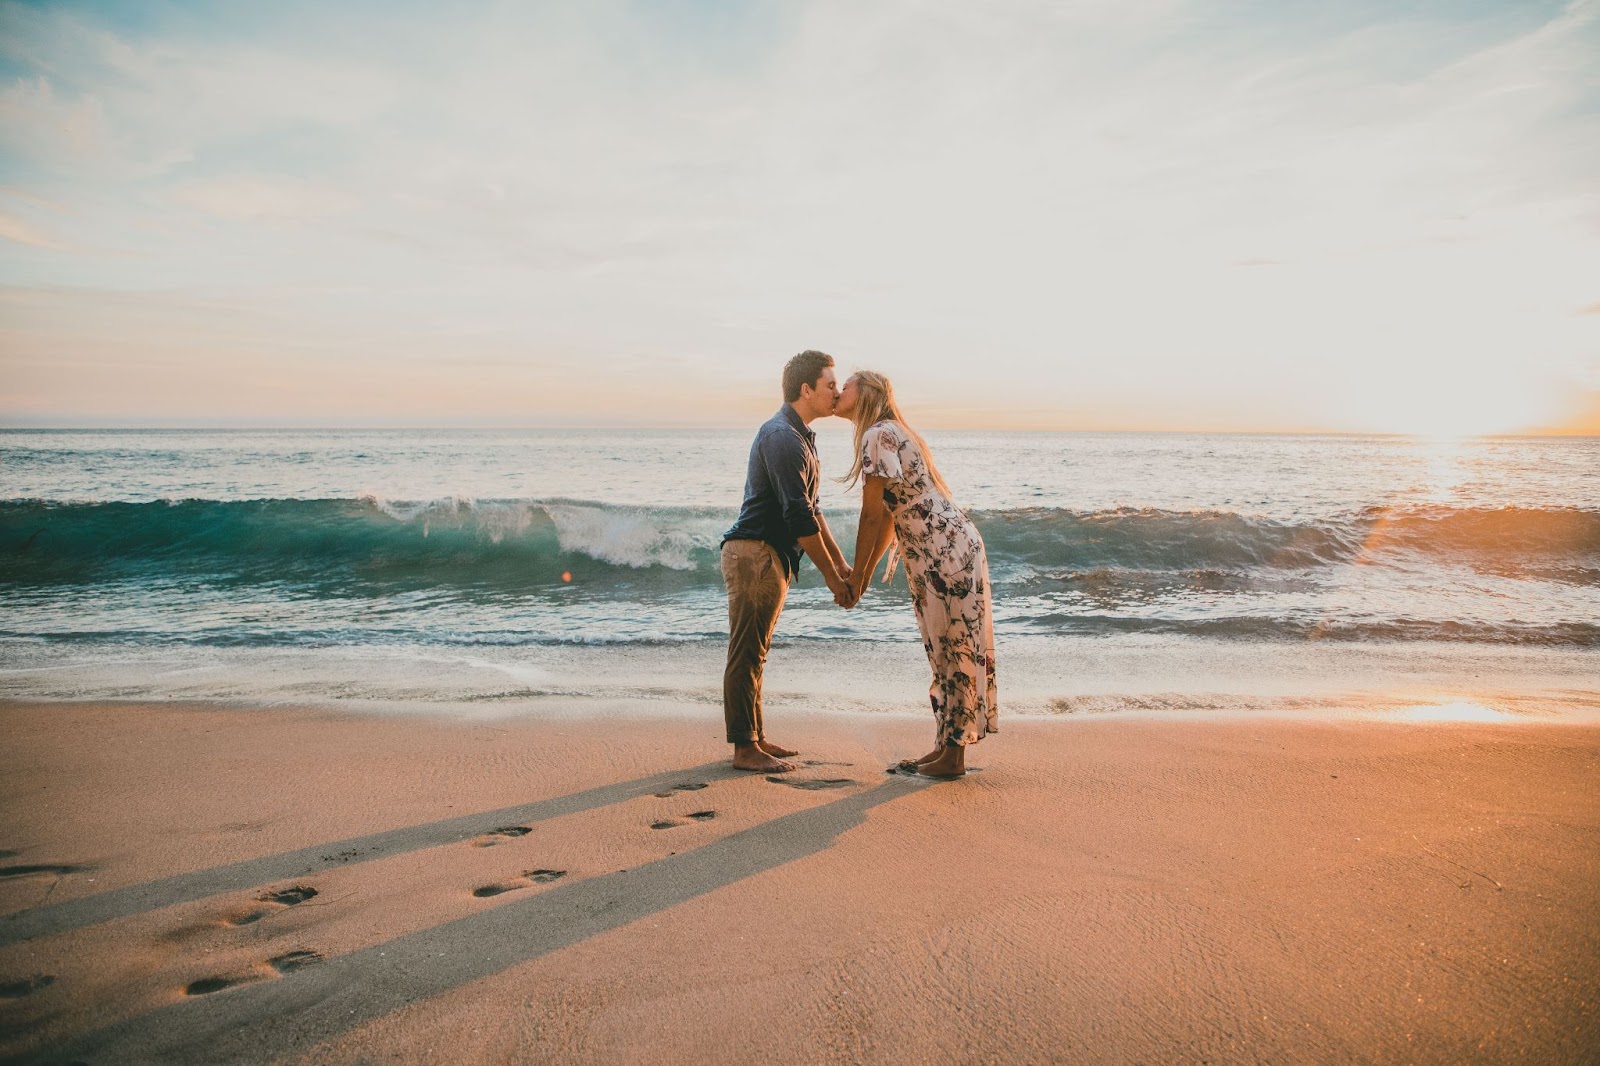 An adventurous couple kisses on a beach during low tide as the sunsets in the background